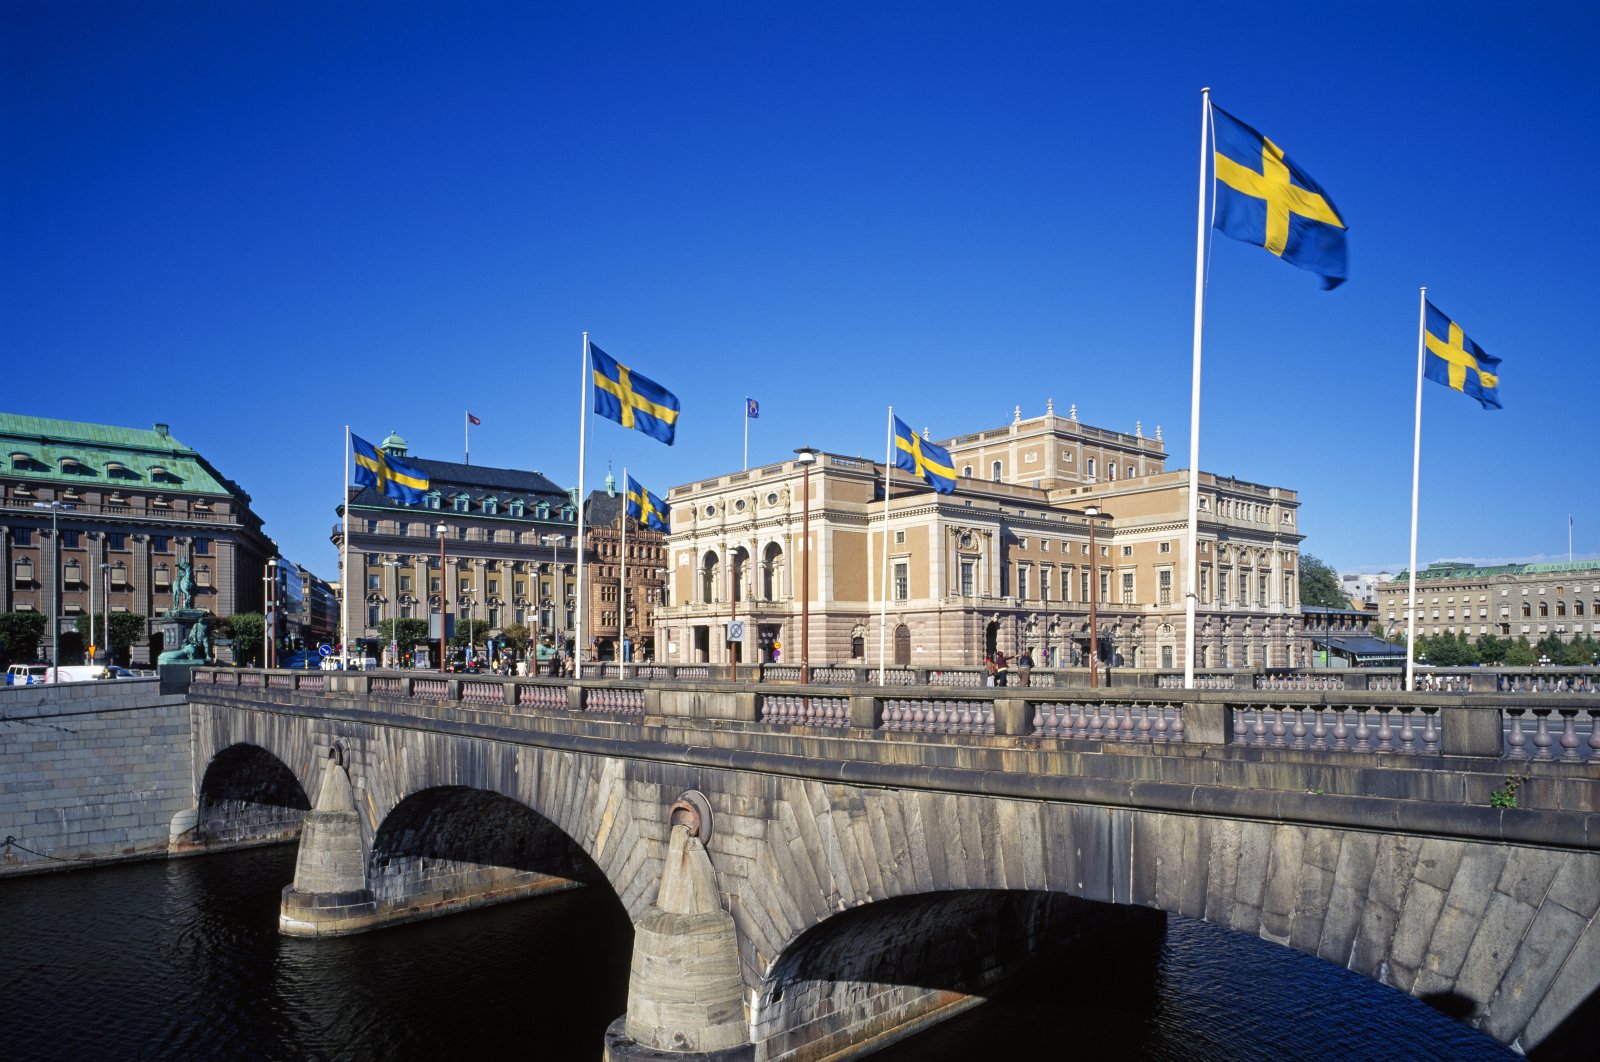 A general view of Stockholm, Sweden is seen in this photo (Getty Images)